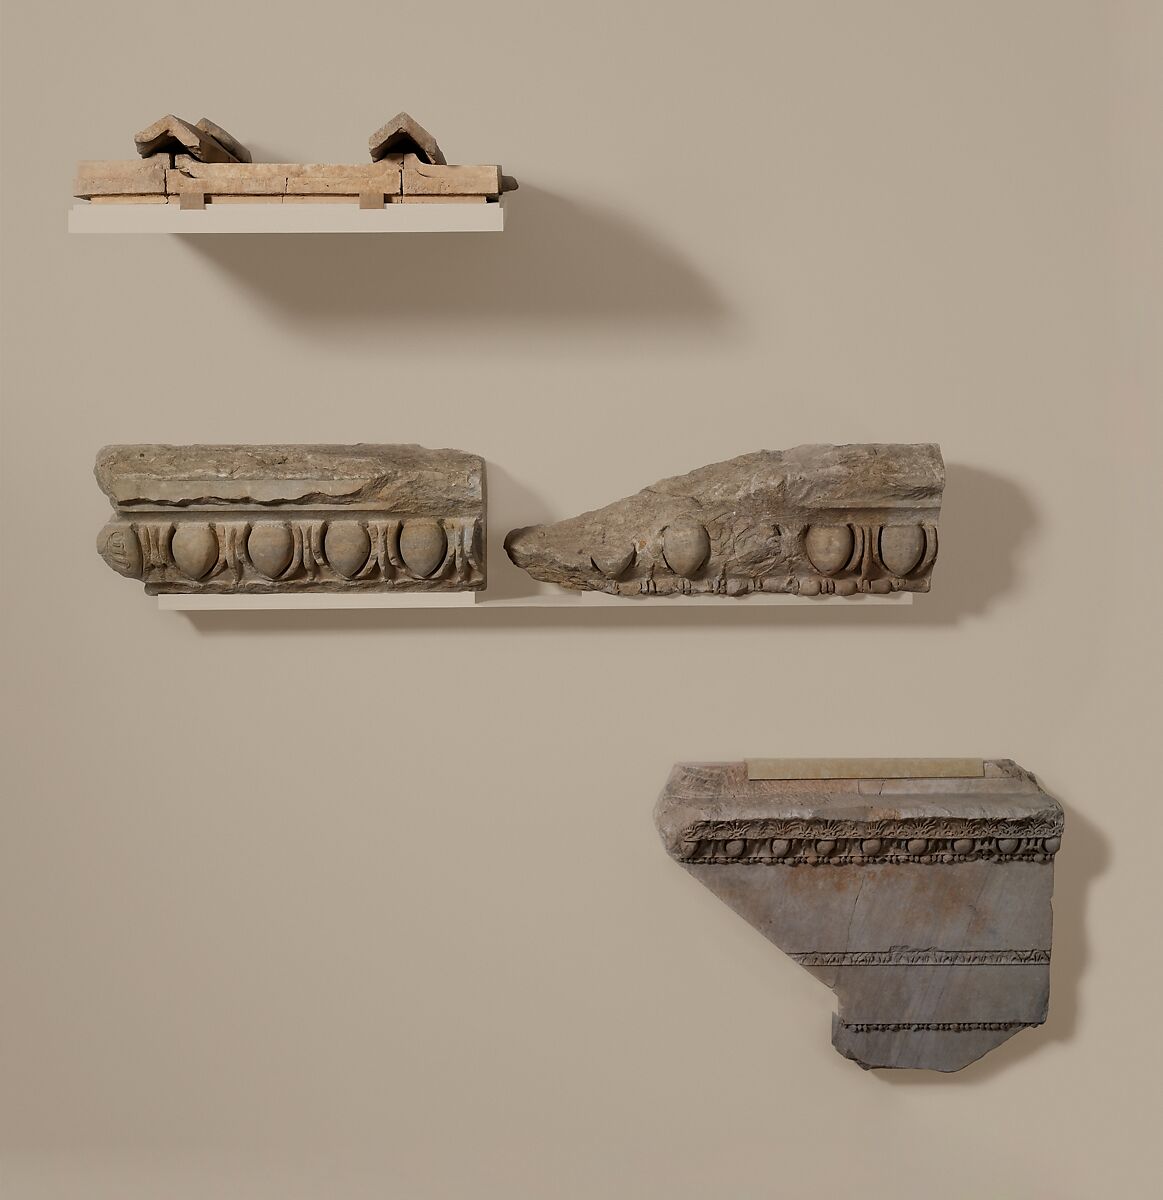 Marble doorjamb fragment from the Temple of Artemis at Sardis, Marble, Roman 